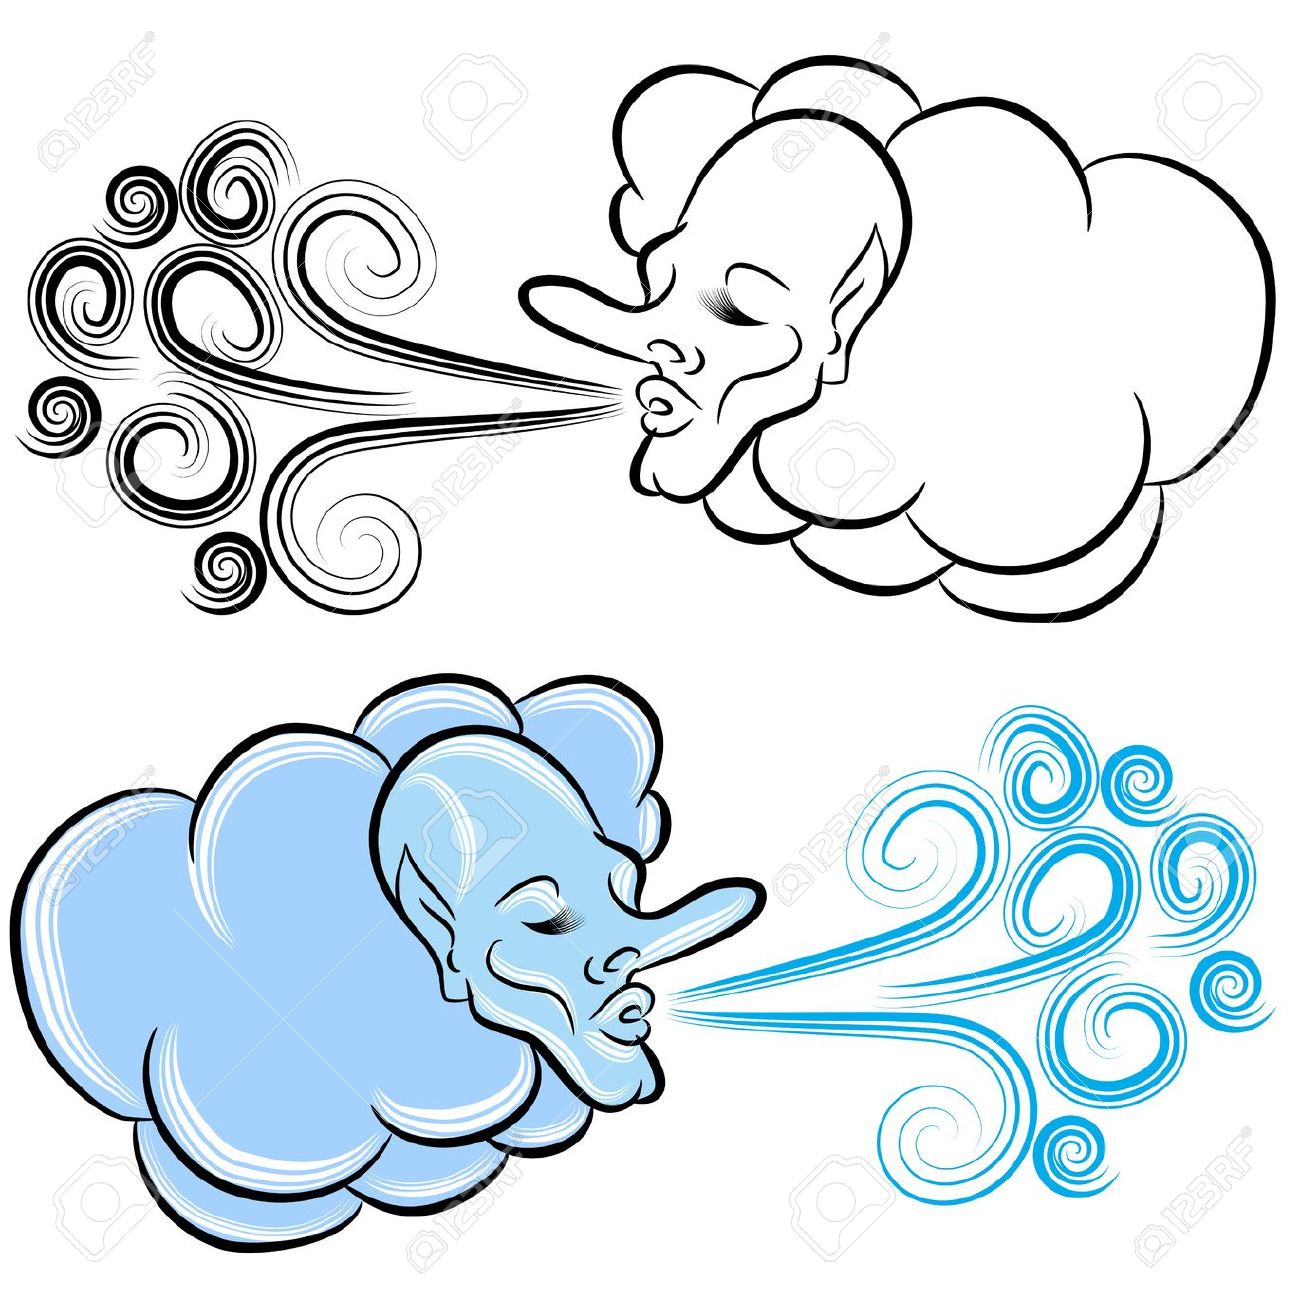 Air clipart wind. Blowing panda free images